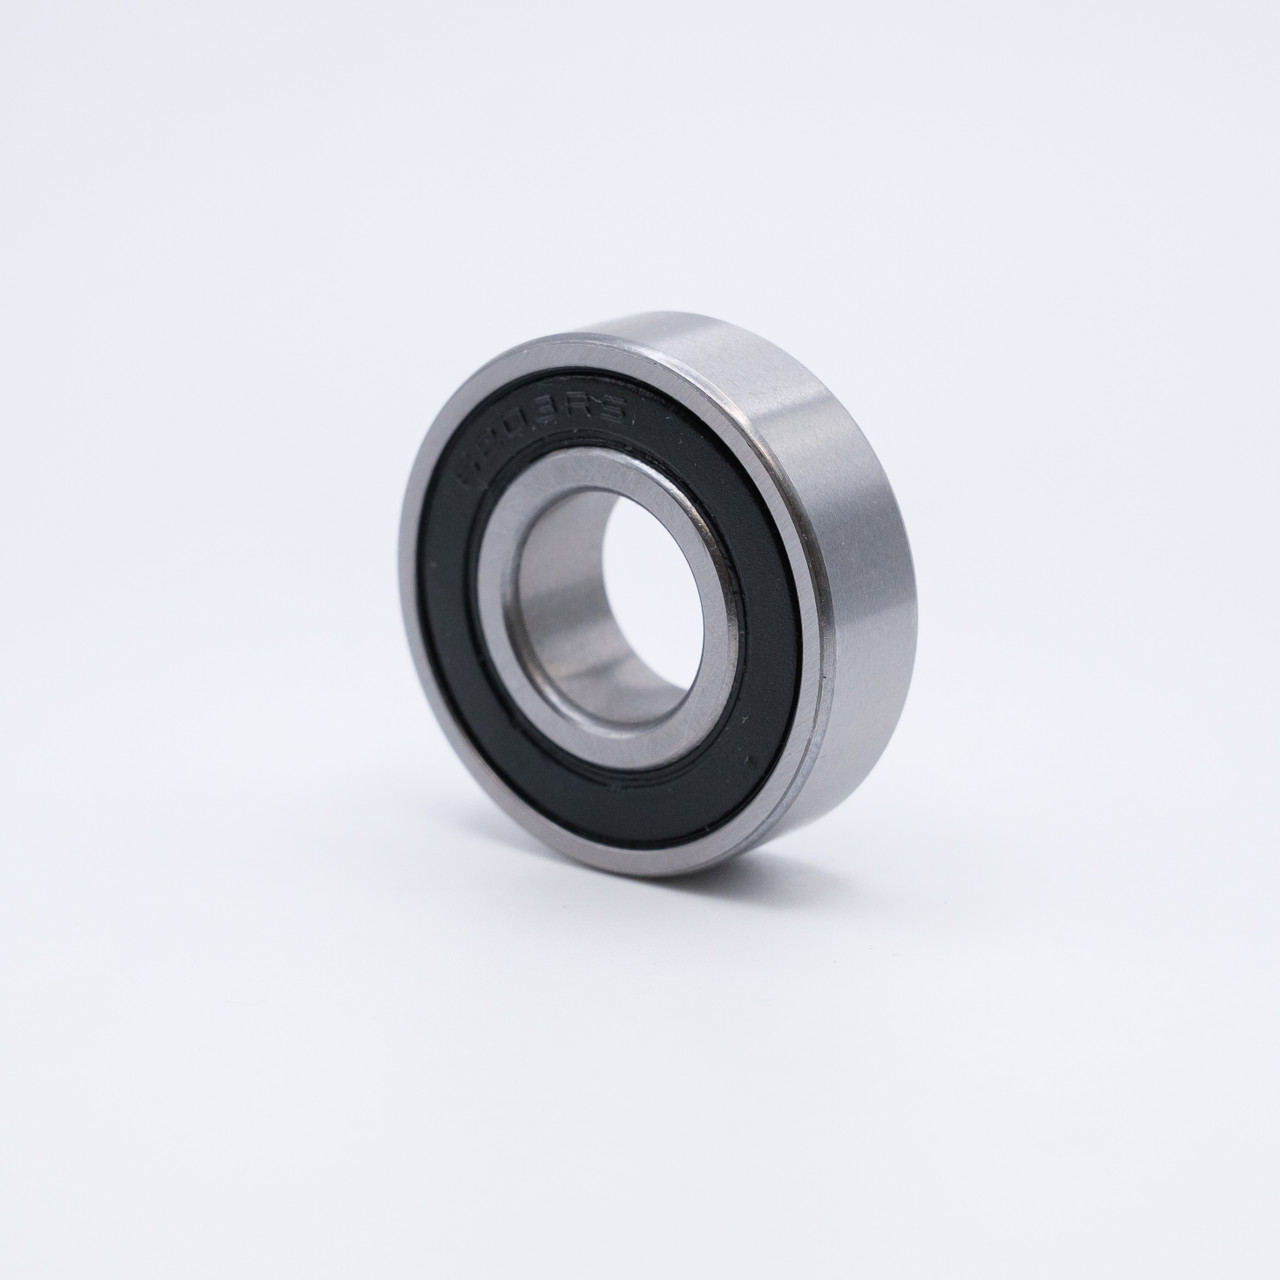 SS6201-2RS Stainless Steel Ball Bearing 12x32x10 Angled View